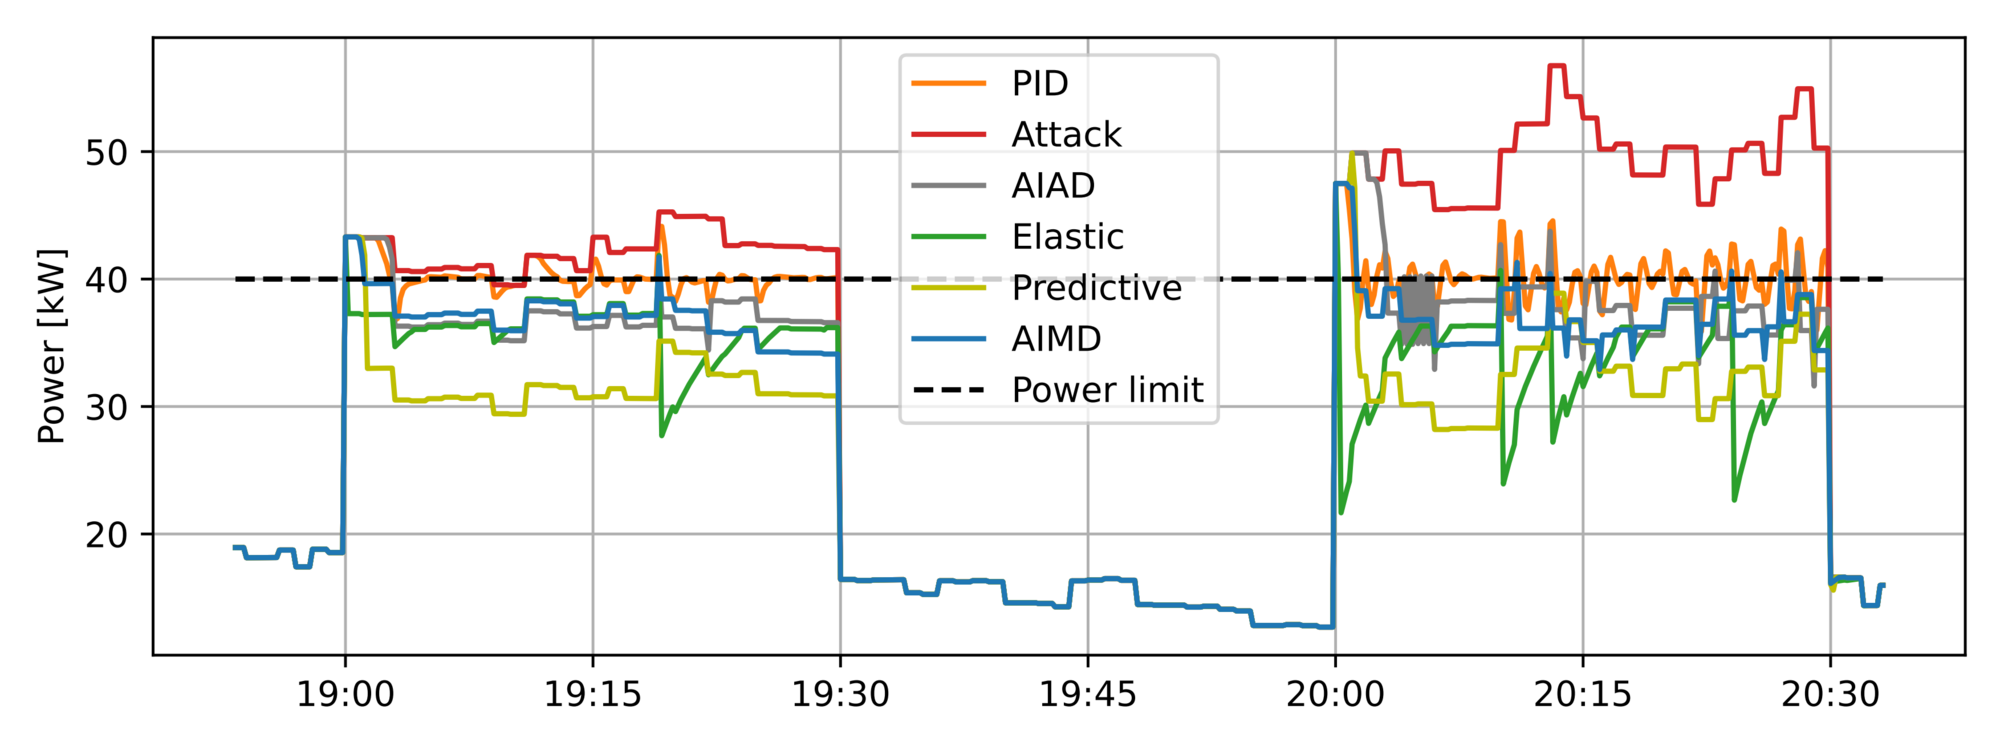 Figure 2: Total transformer power in the simulation scenario. Red is the Attack power, grey the original GridShield implementation, and blue and green show the AIMD and improved AIMD results